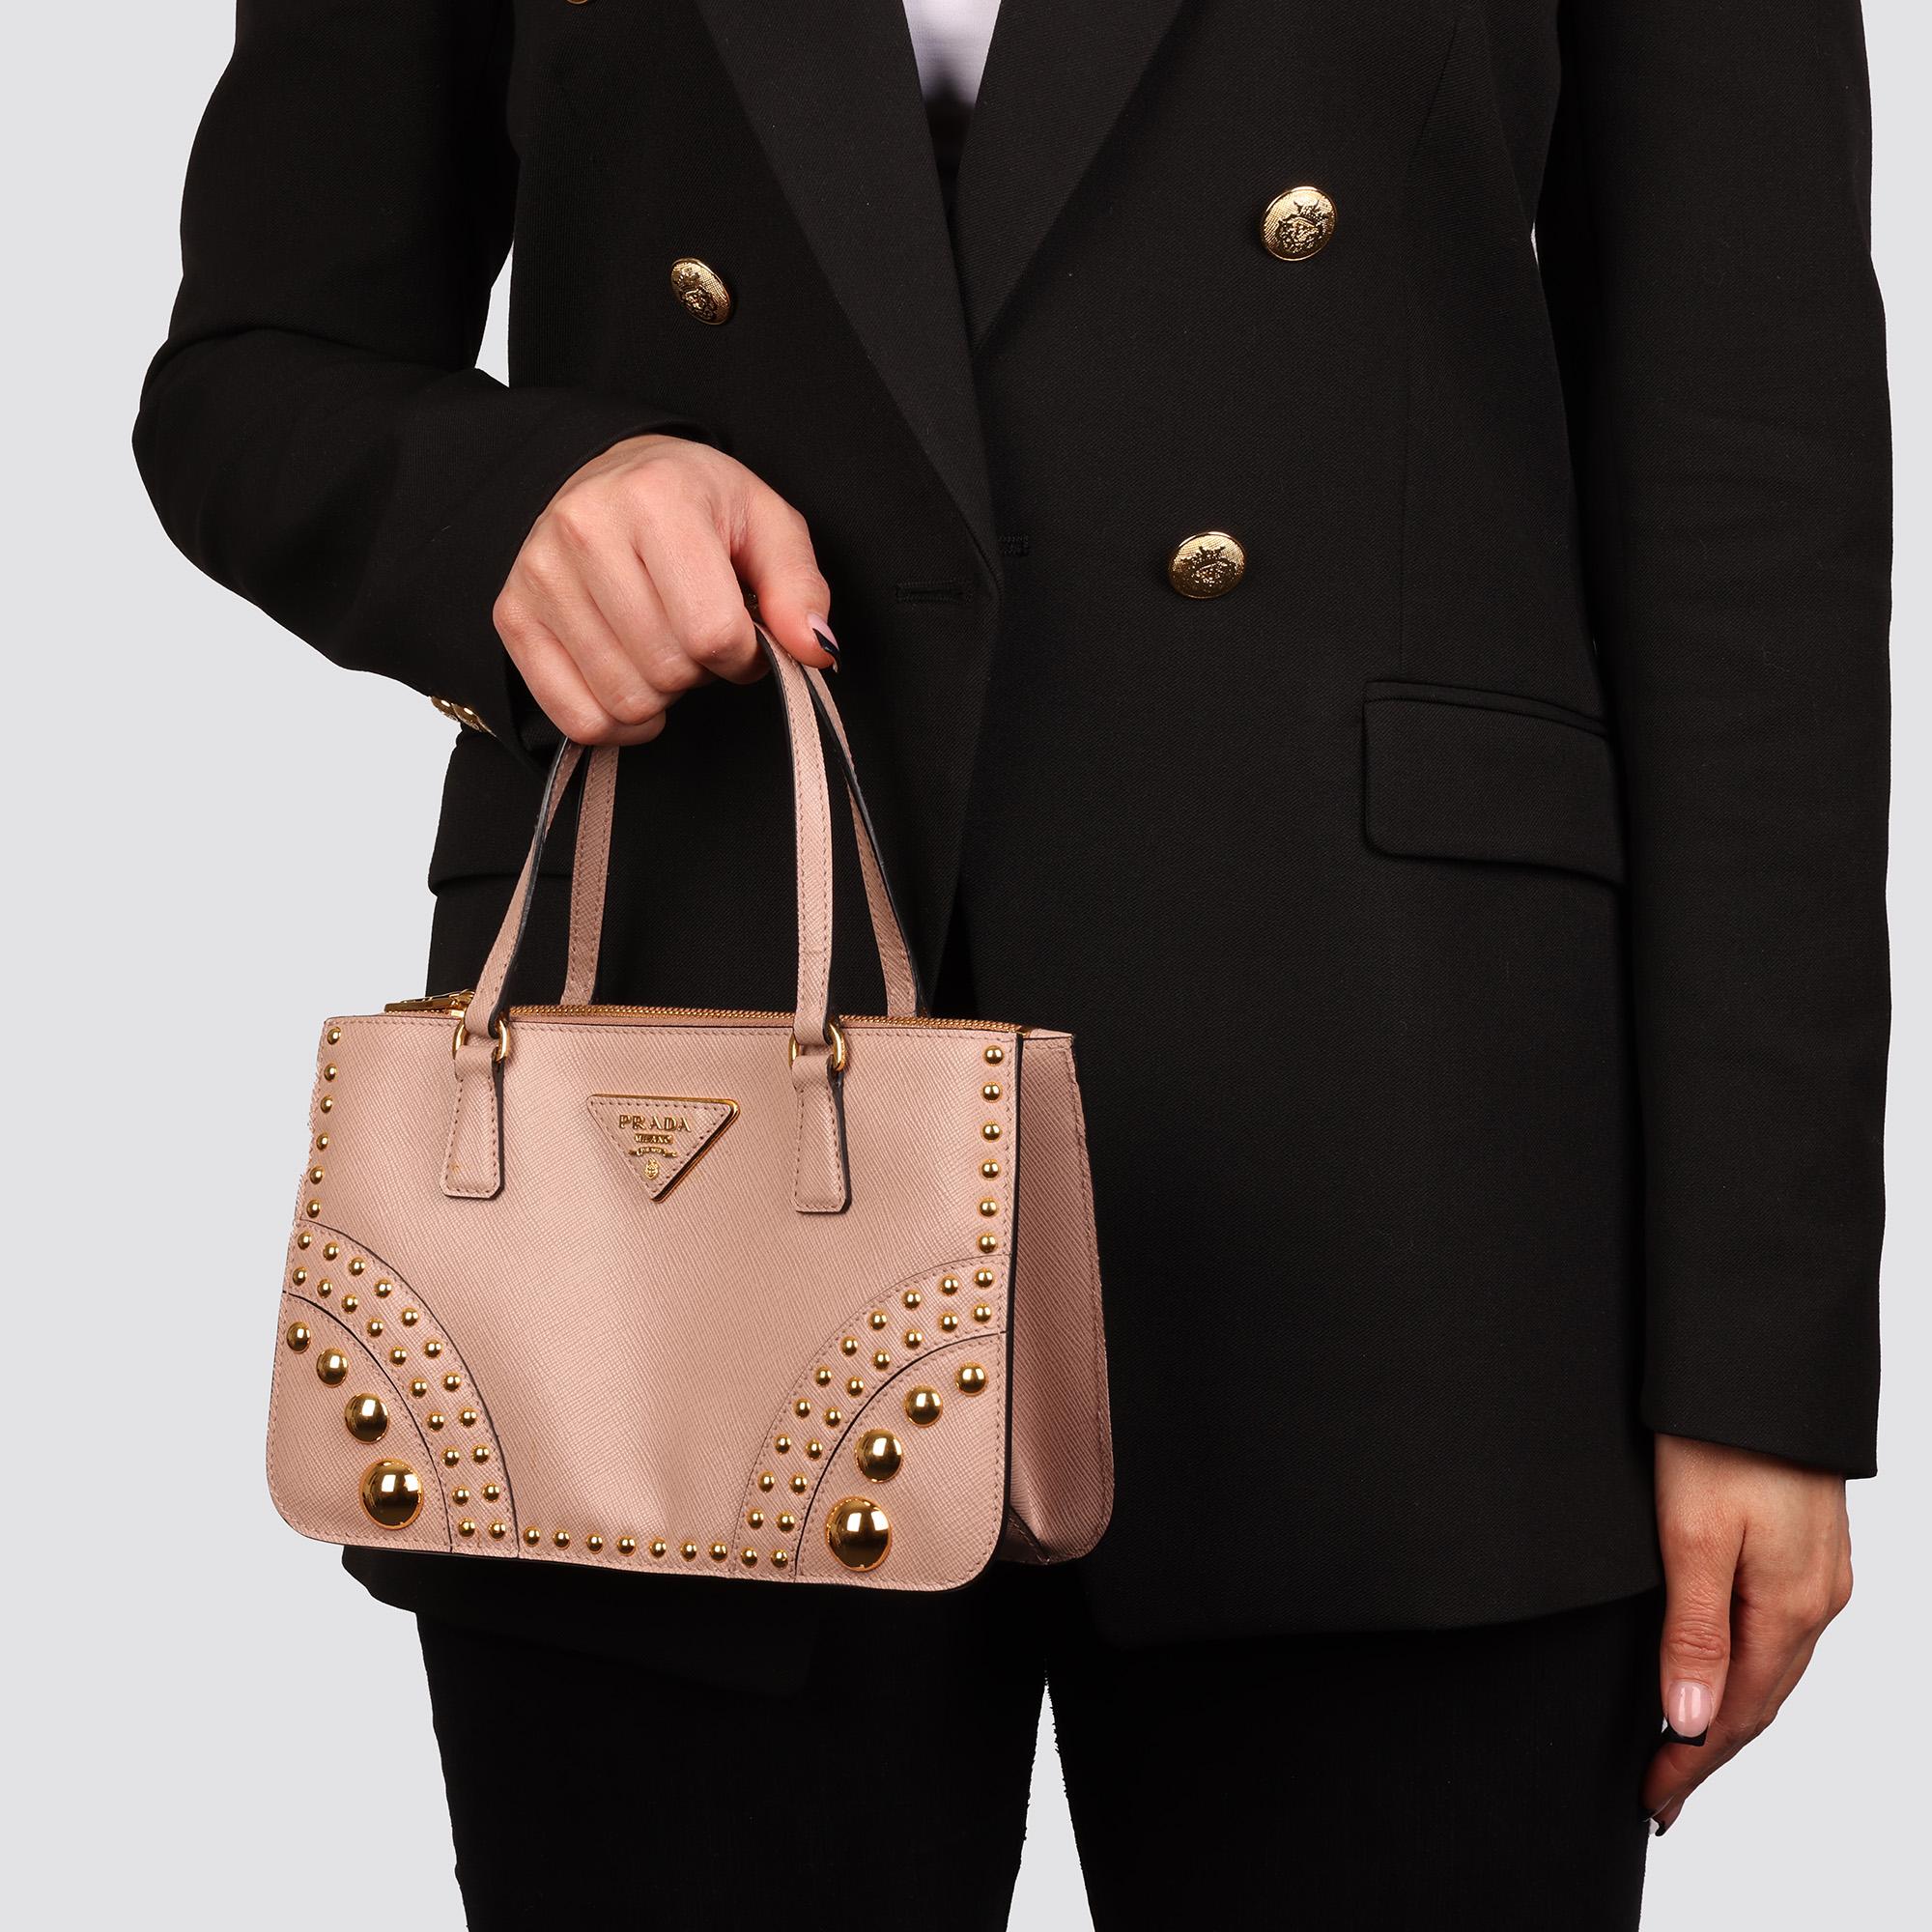 Prada BEIGE STUDDED SAFFIANO LEATHER DOUBLE ZIP TOTE For Sale 7